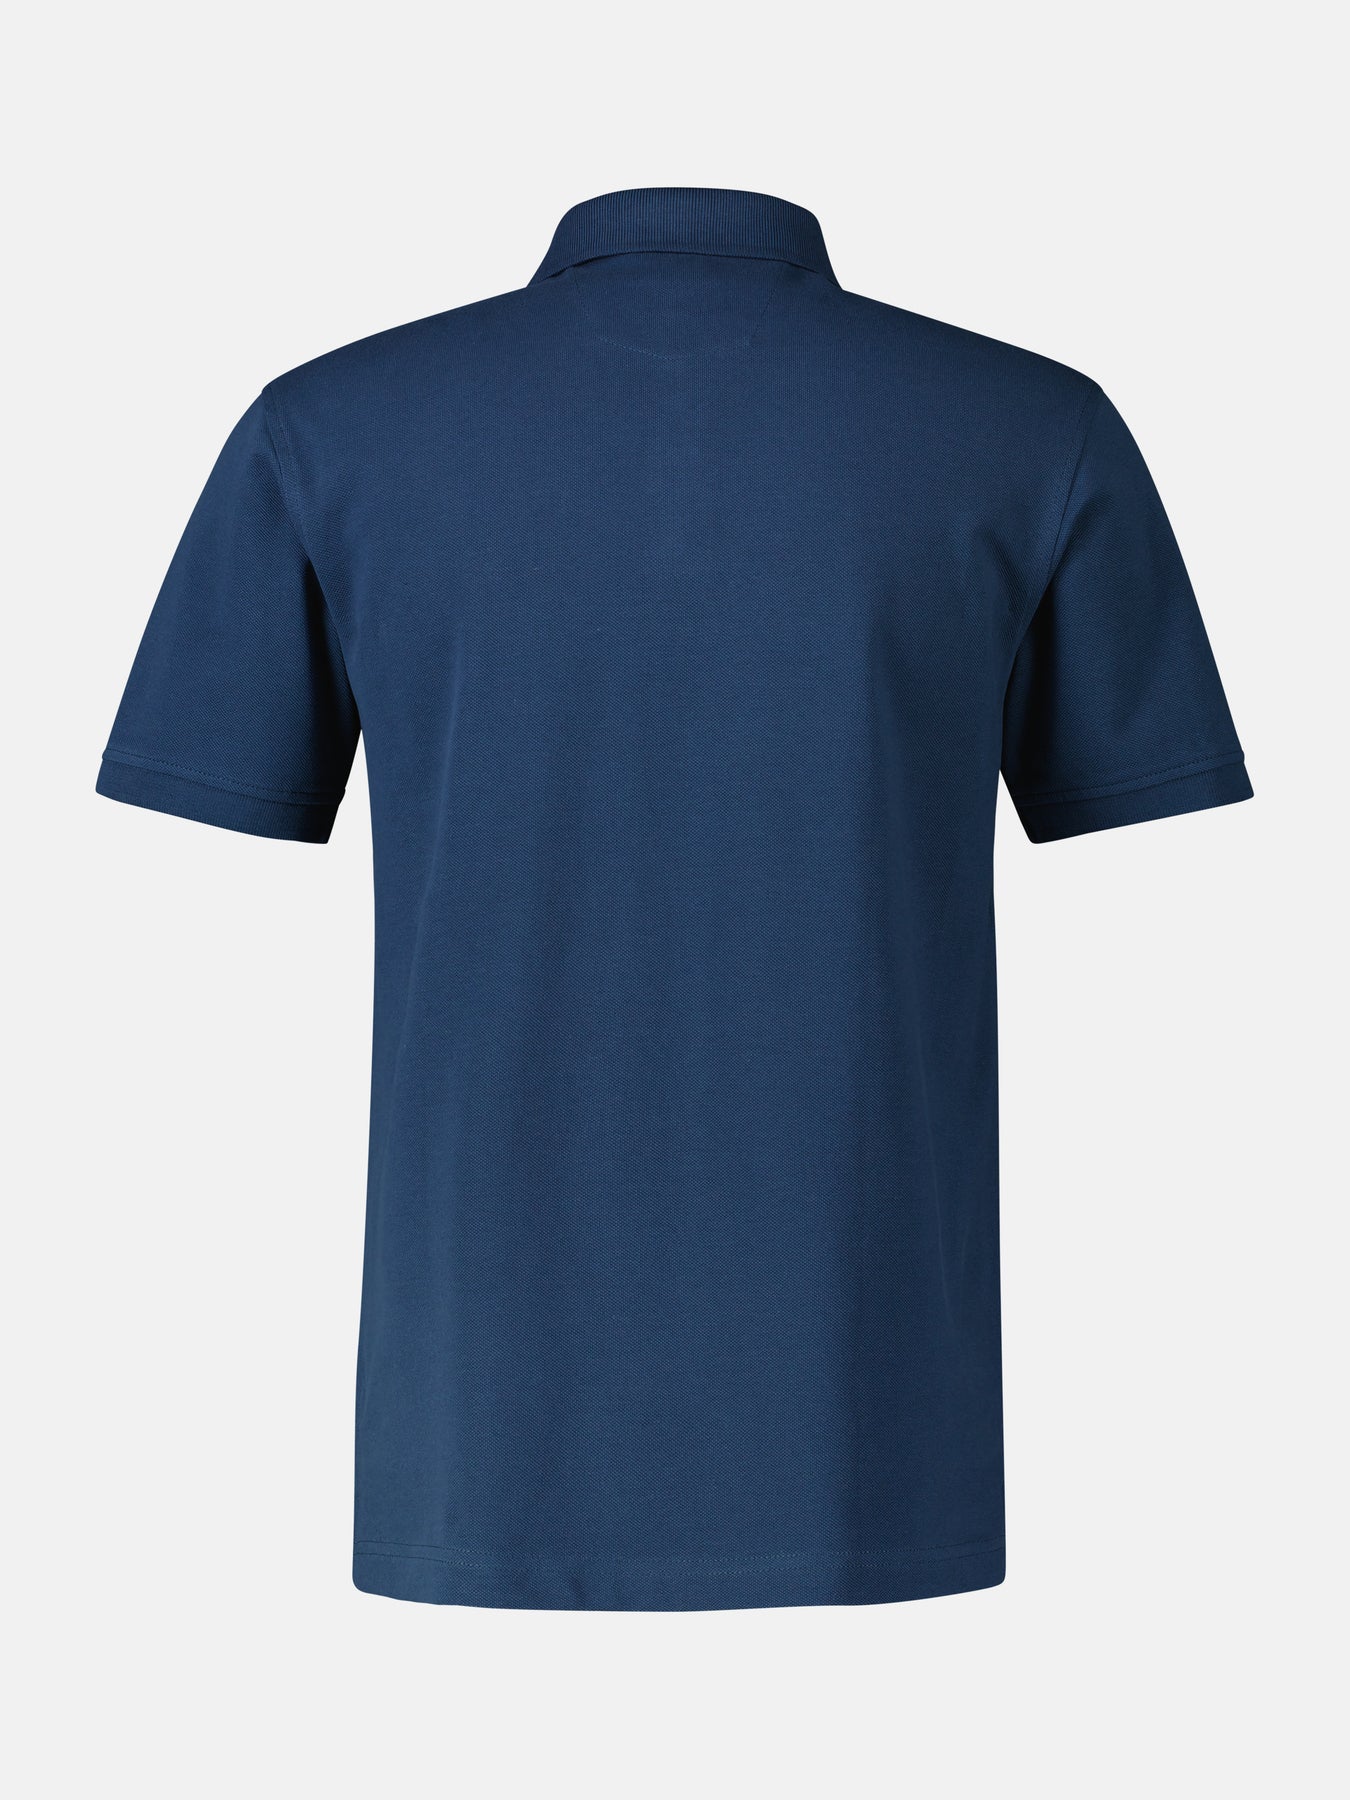 Polo shirt in many – LERROS SHOP colors